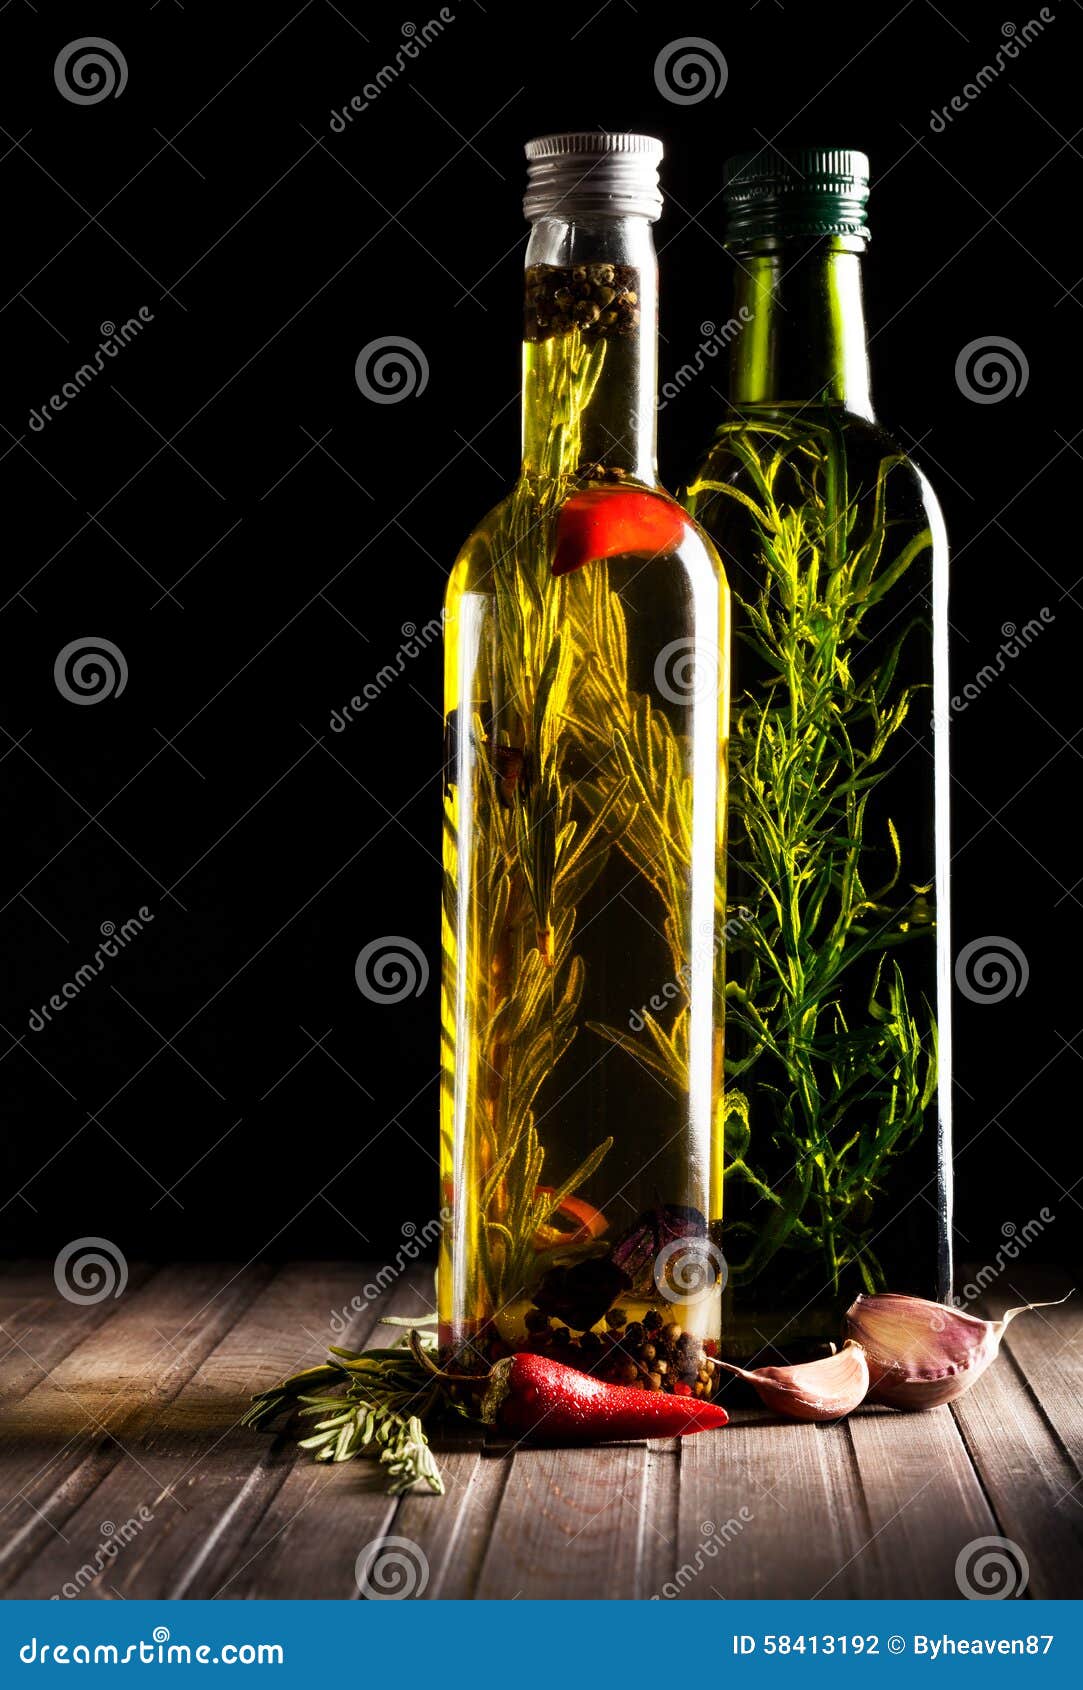 Homemade oil with herbs stock photo. Image of dark, health - 58413192